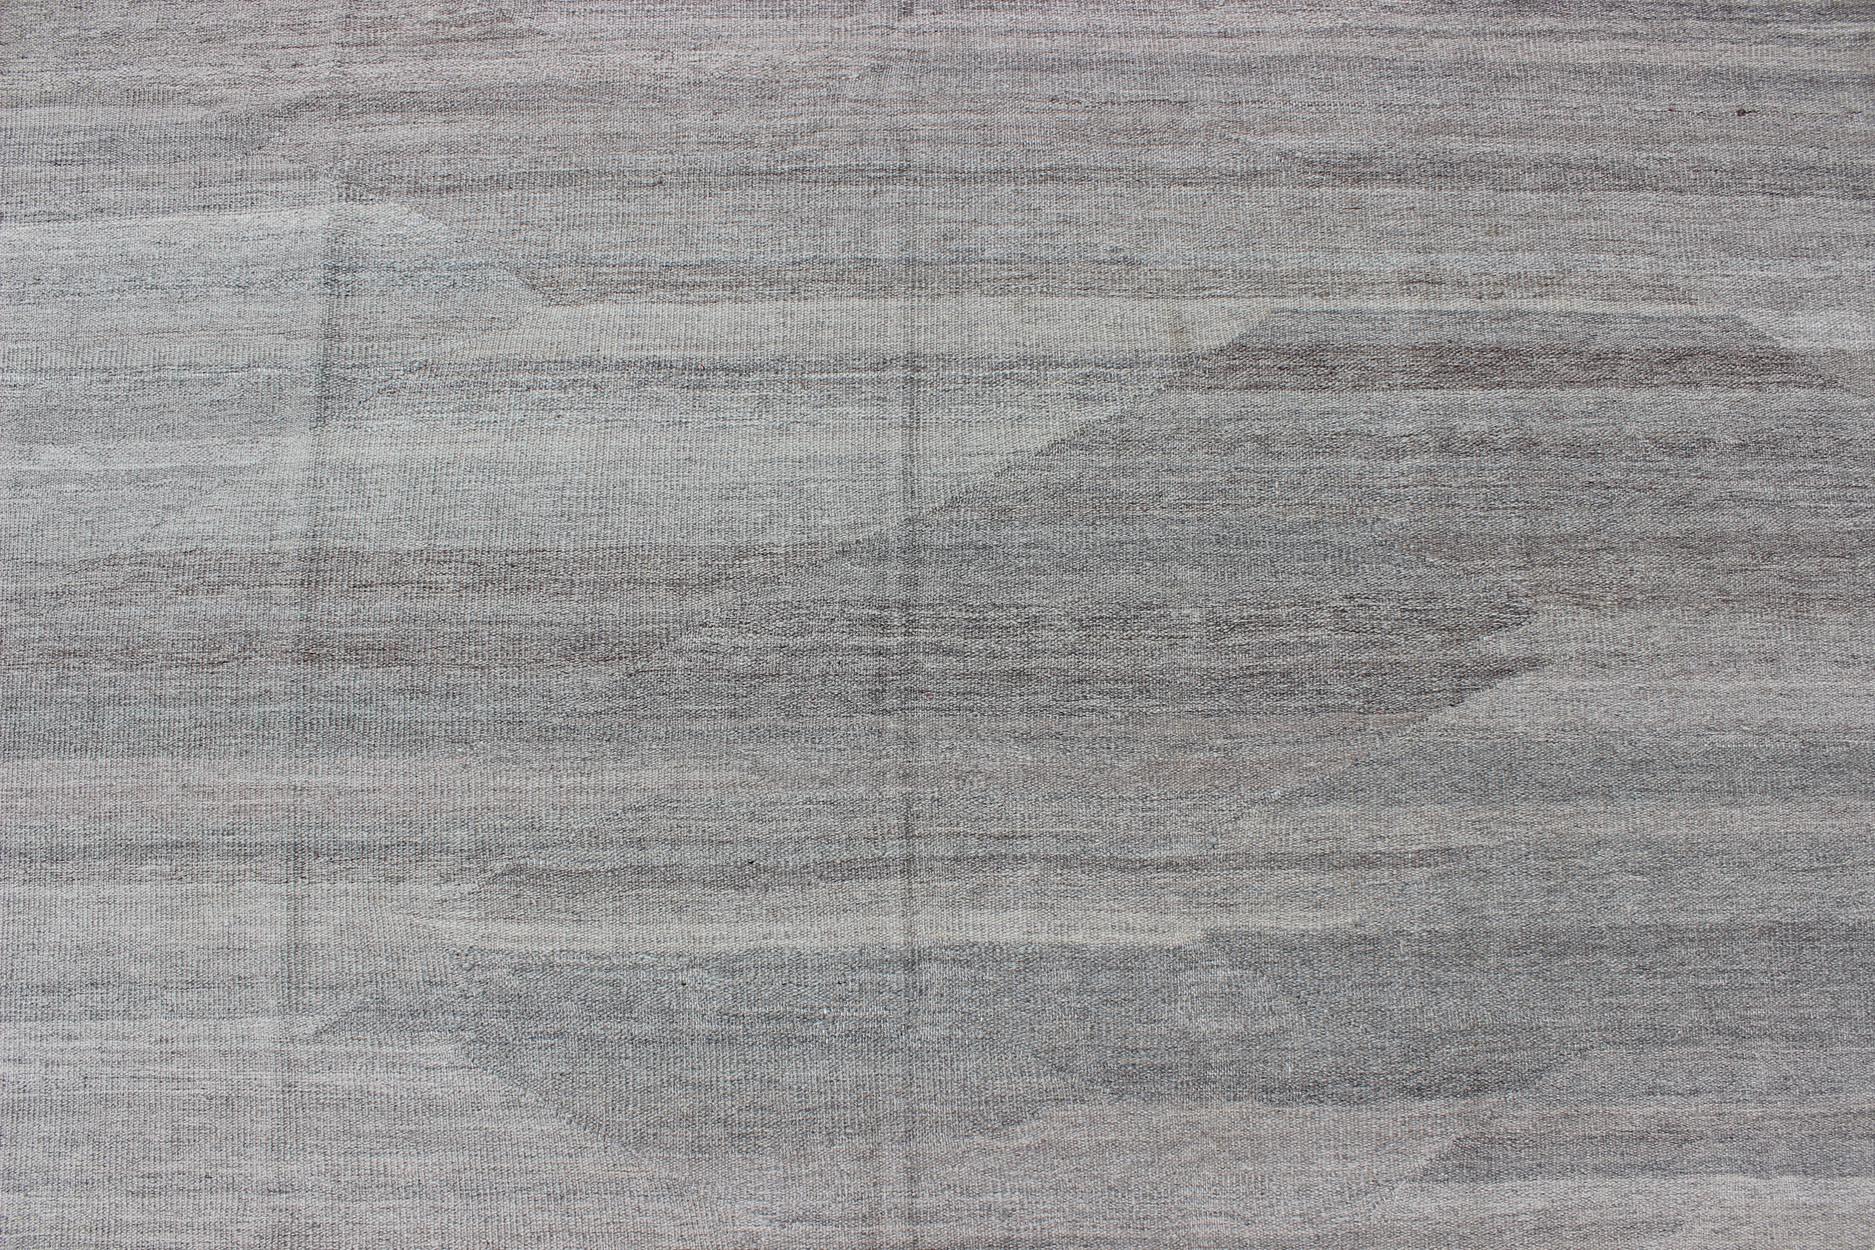 Very Large Modern Kilim with Solid Minimalist Design in Variation of Gray Tones For Sale 1